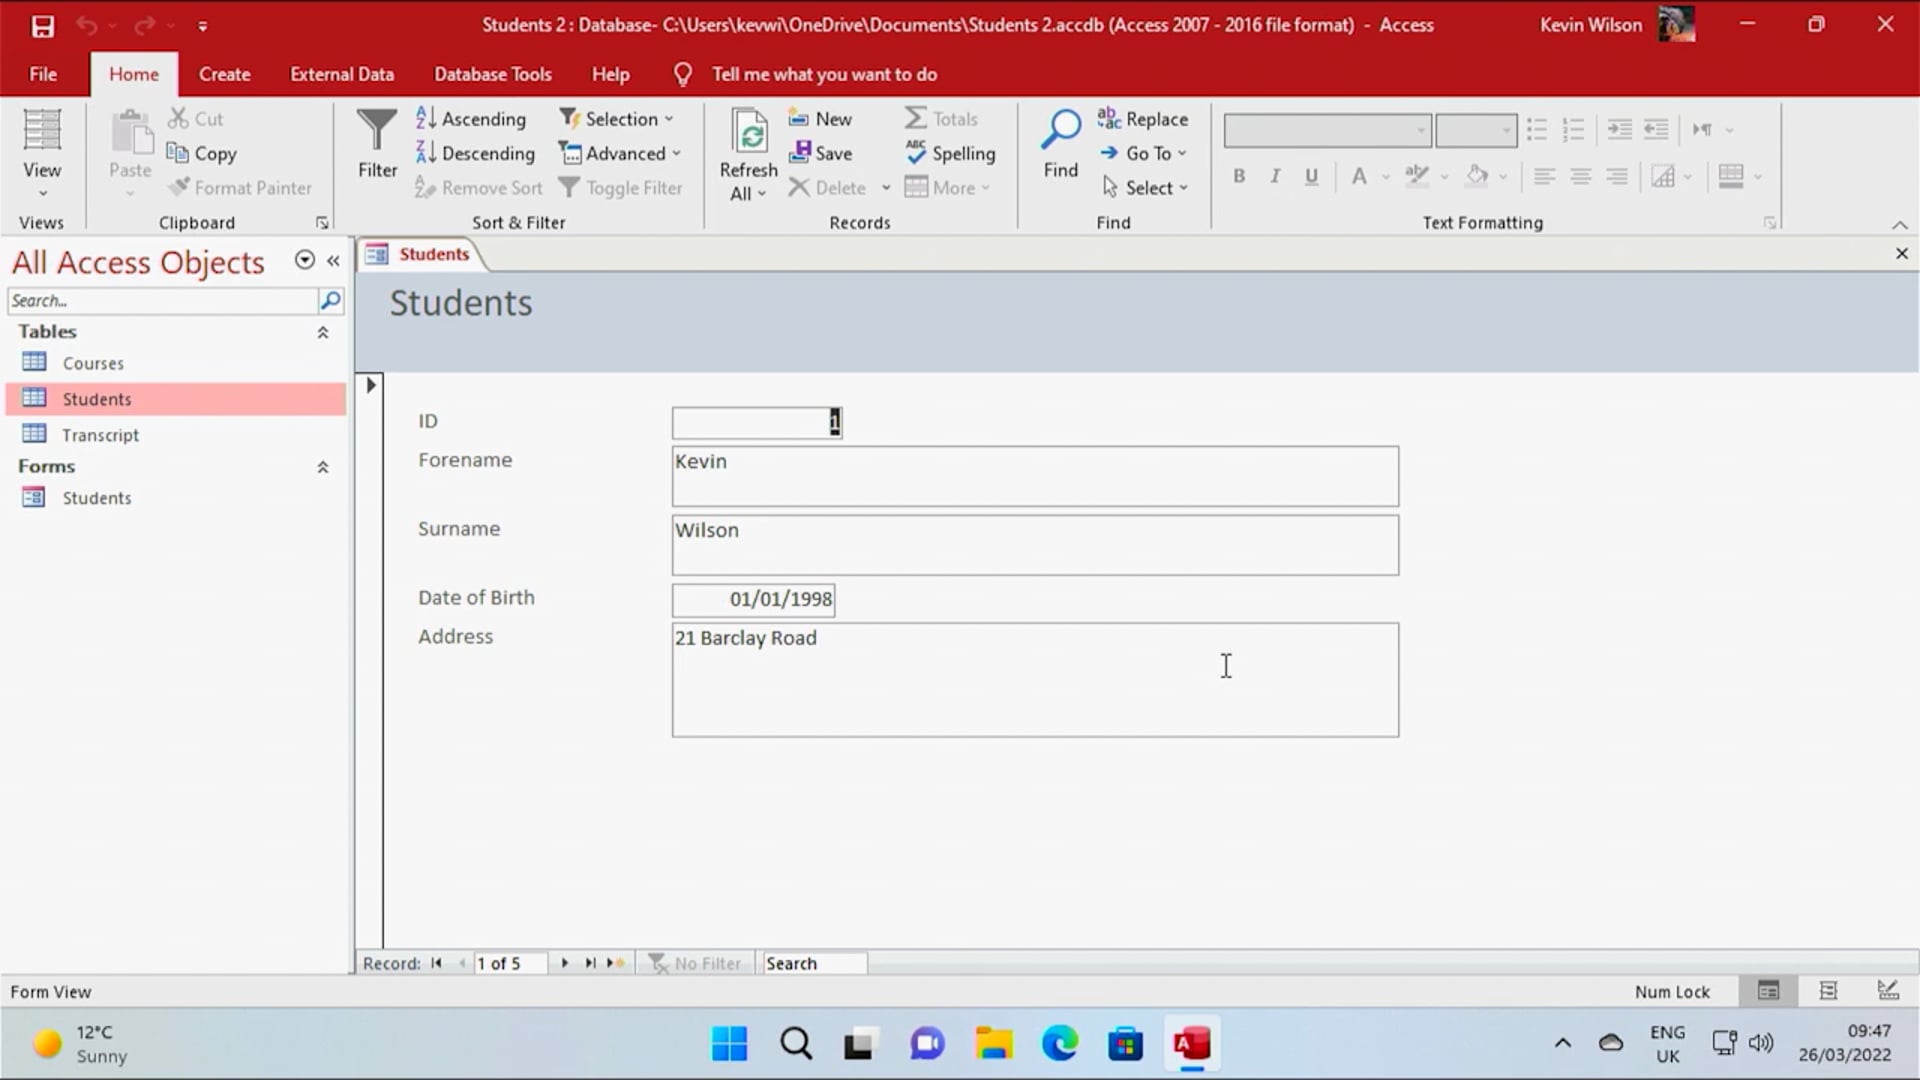 Creating Quick Forms with Forms Wizard